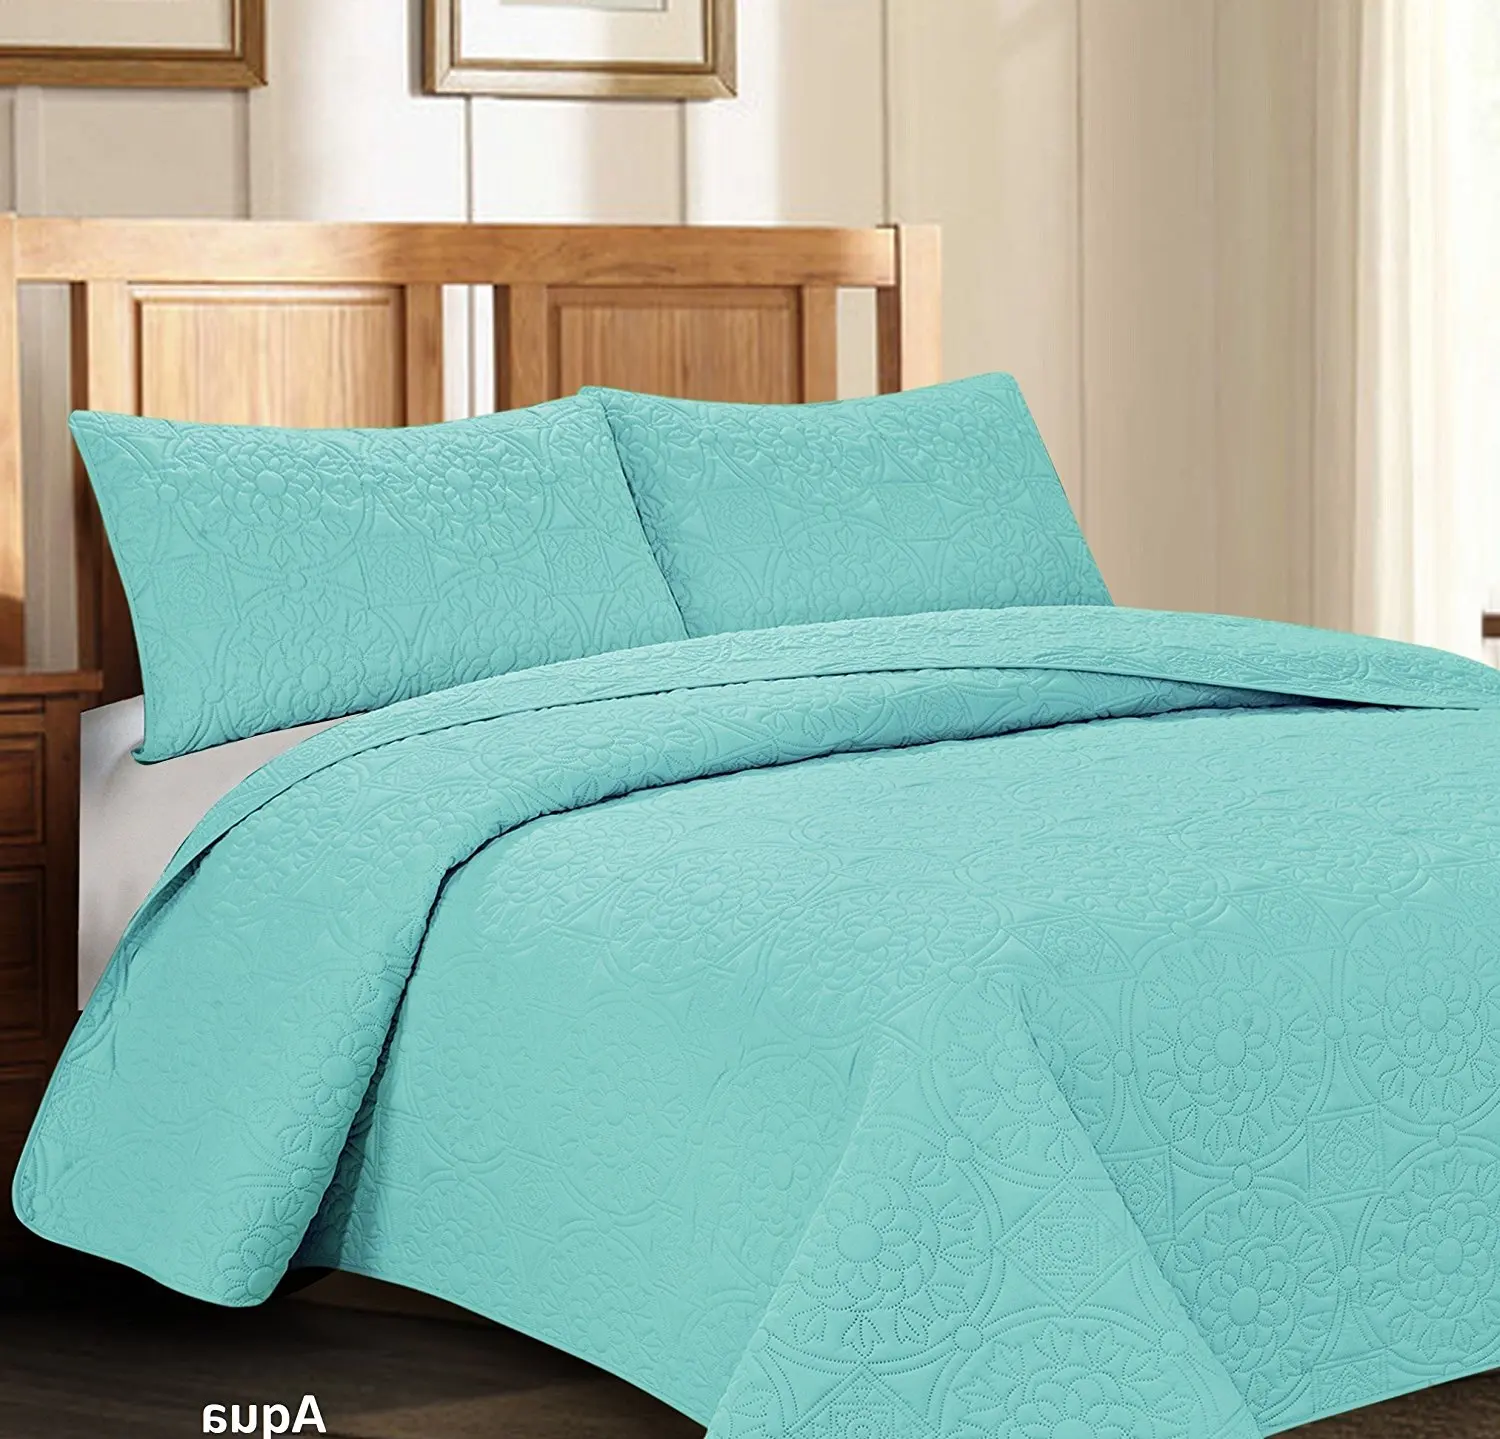 Cheap Solid Blue Quilt, find Solid Blue Quilt deals on line at Alibaba.com